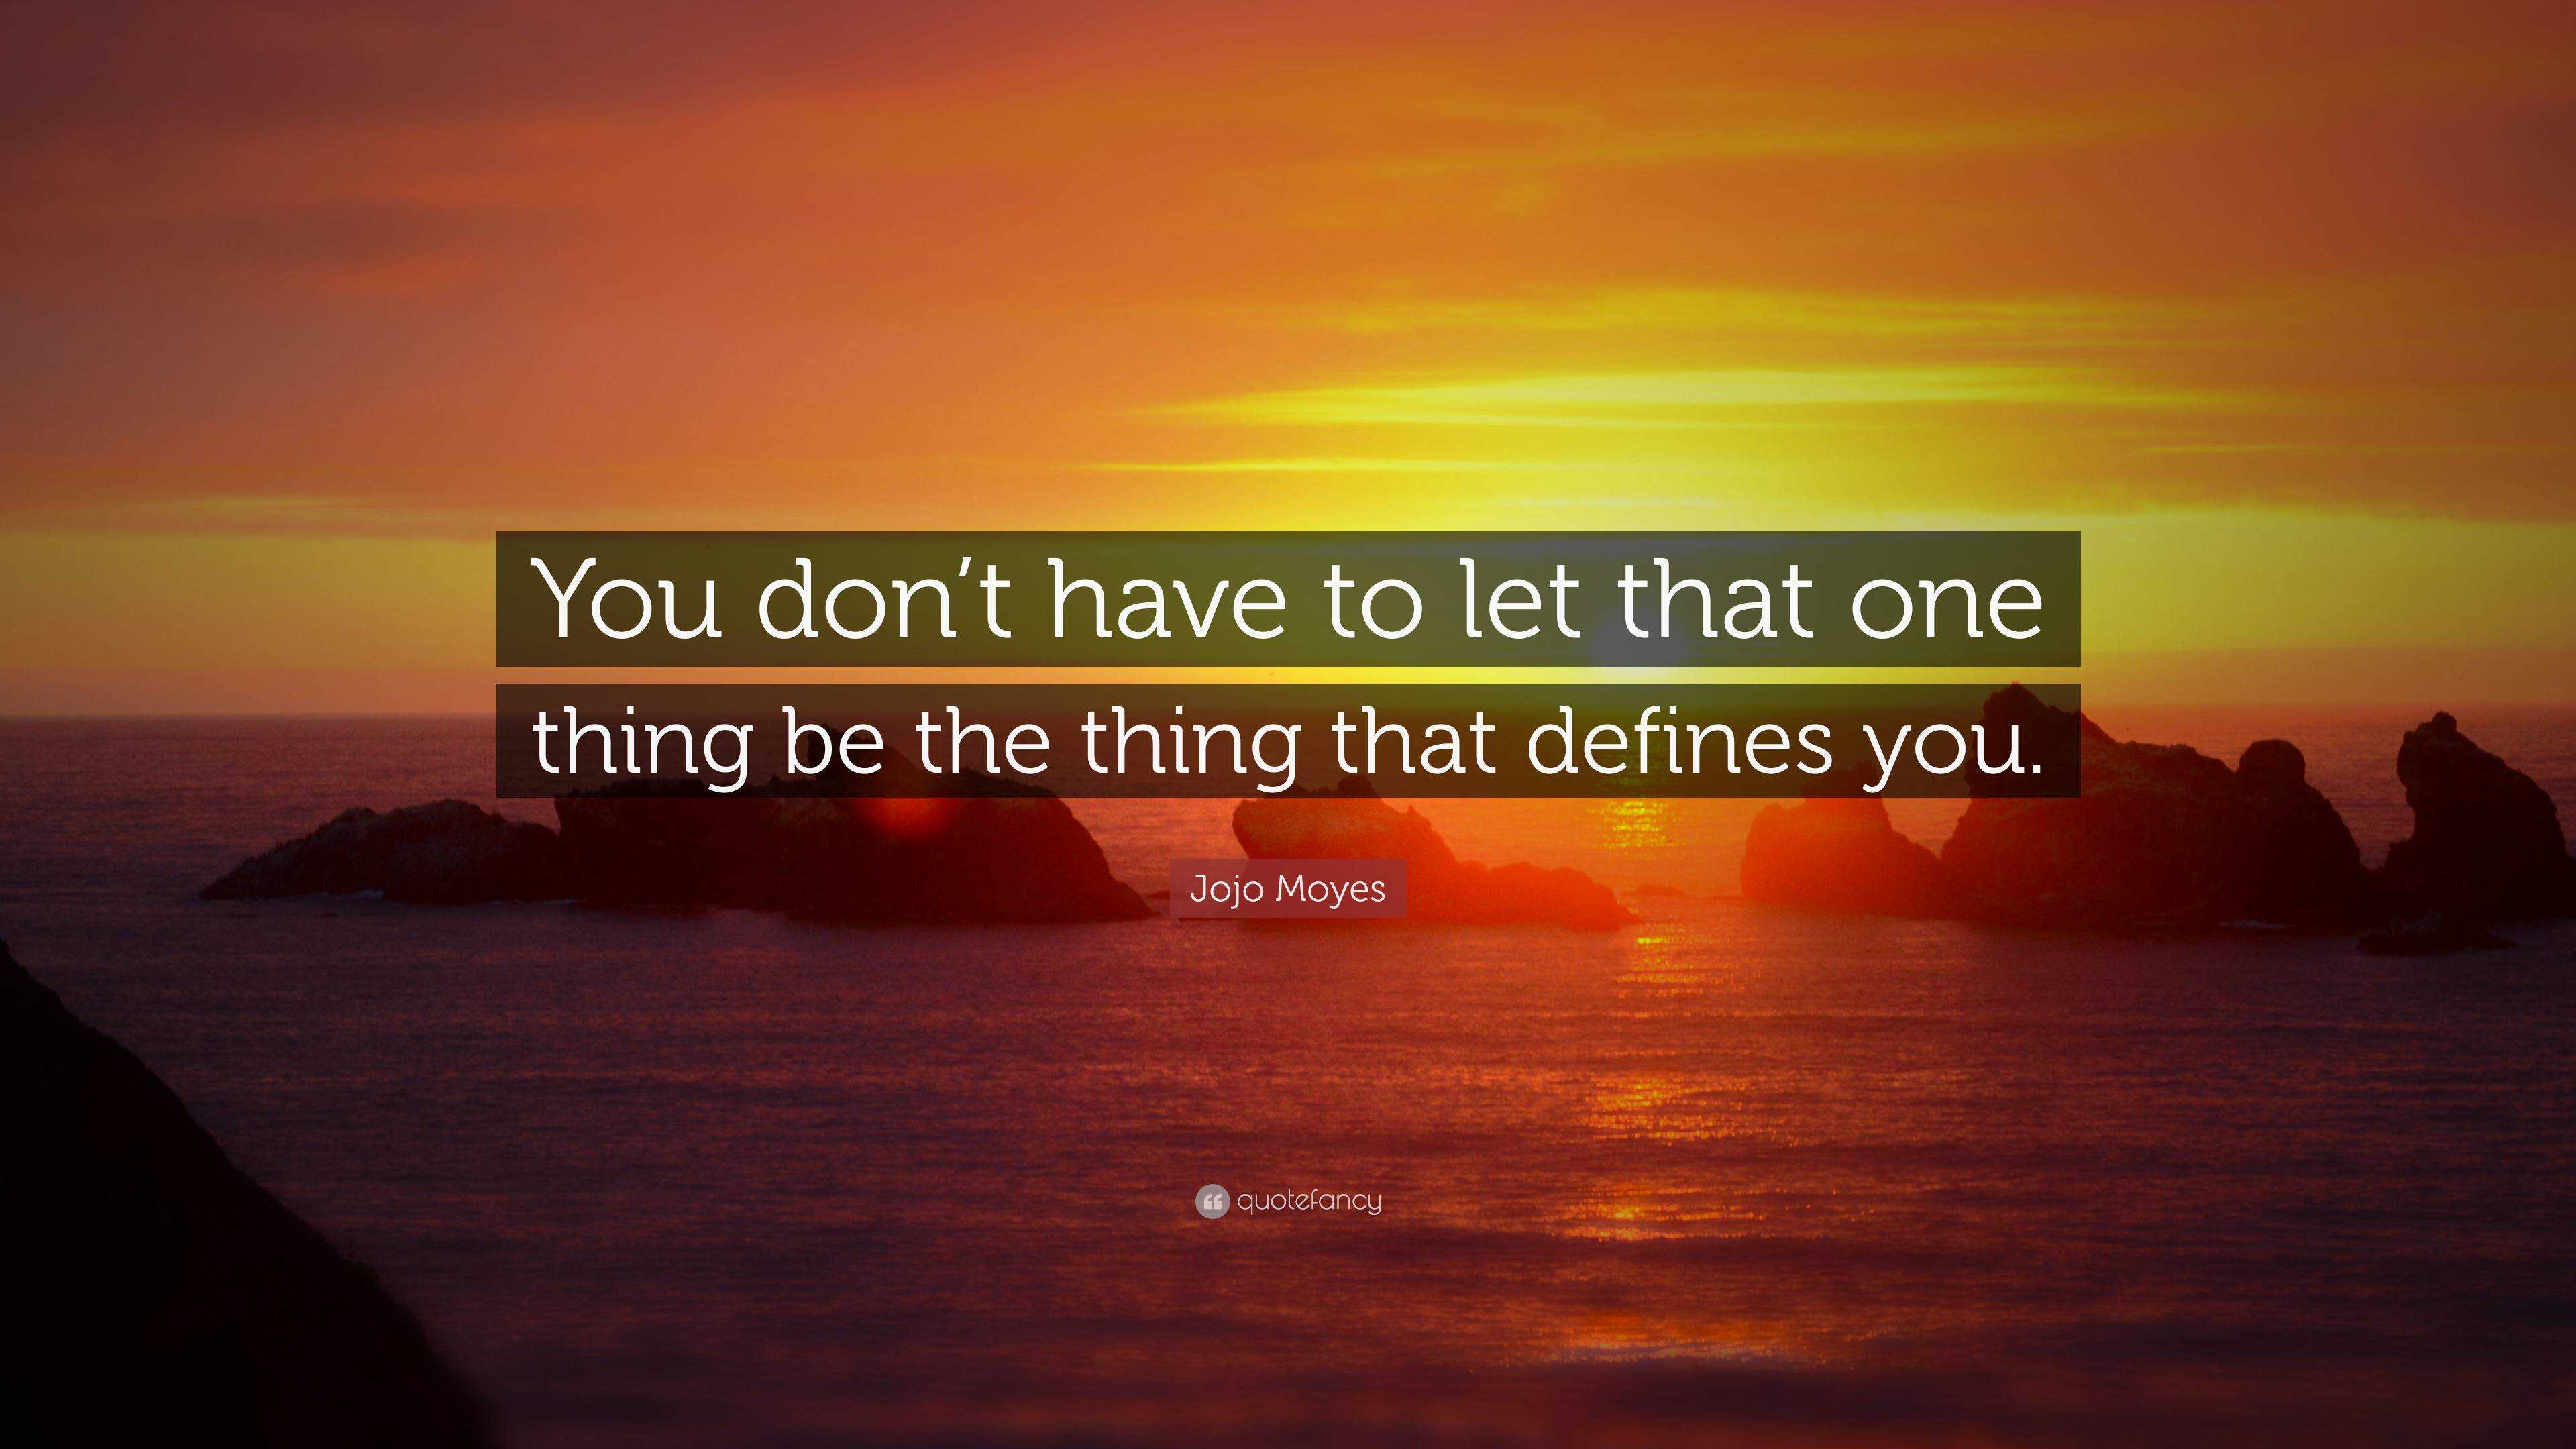 Jojo Moyes Quote: “You don’t have to let that one thing be the thing ...